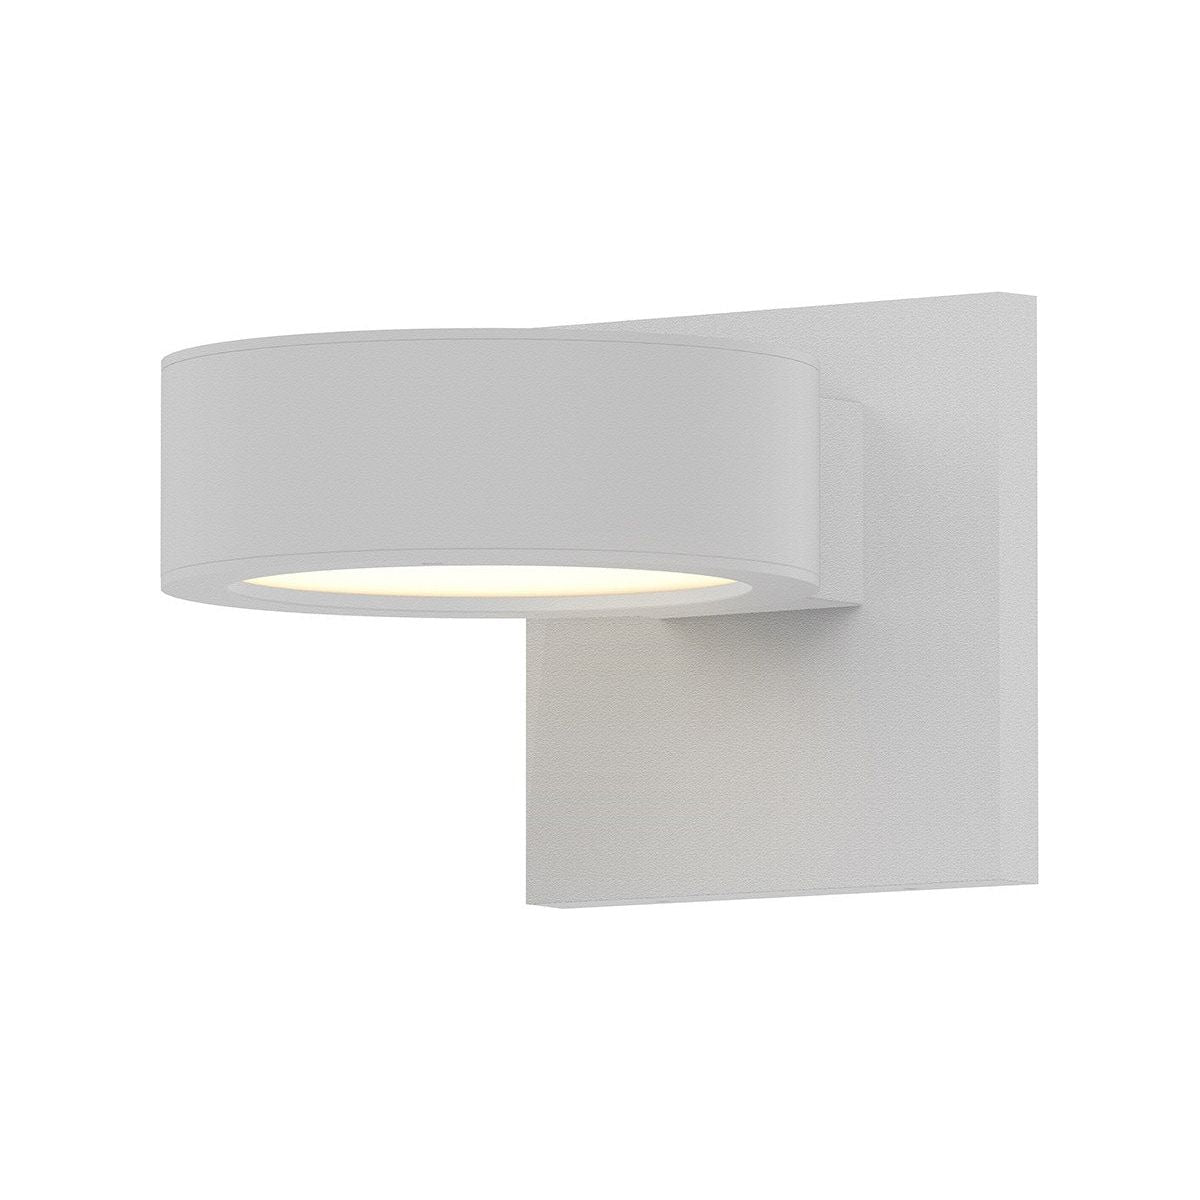 REALS Downlight LED Sconce with Plate Cap and Plate Lens